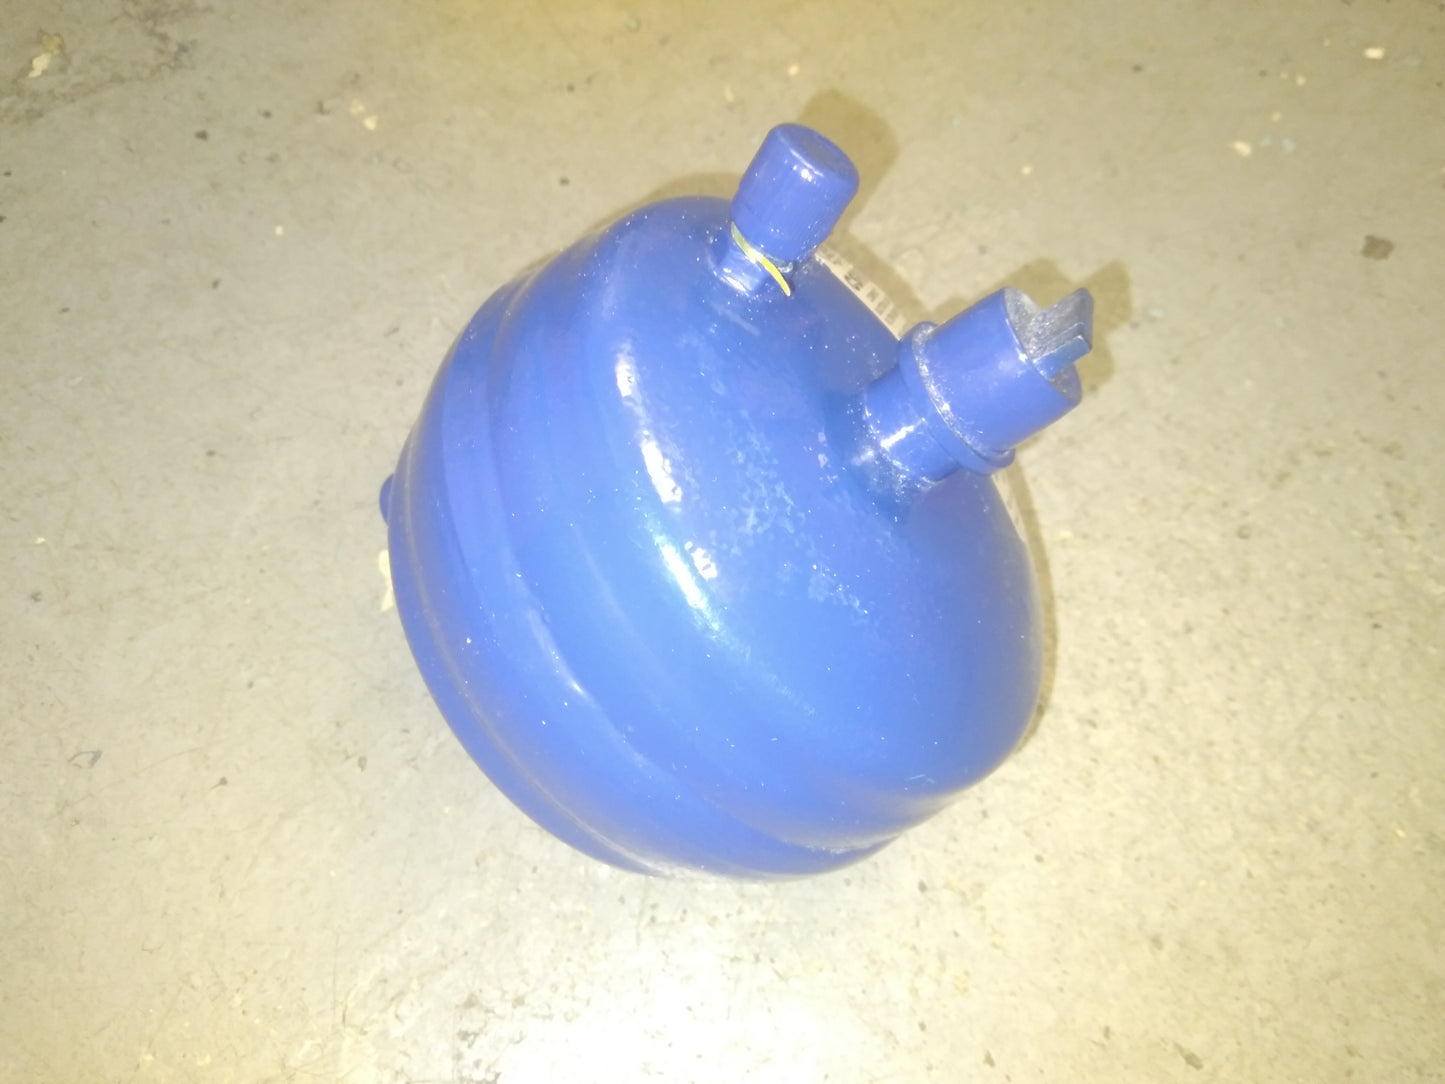 14 CUBIC INCH 5/8" SWEAT COMPACT SUCTION FILTER DRIER